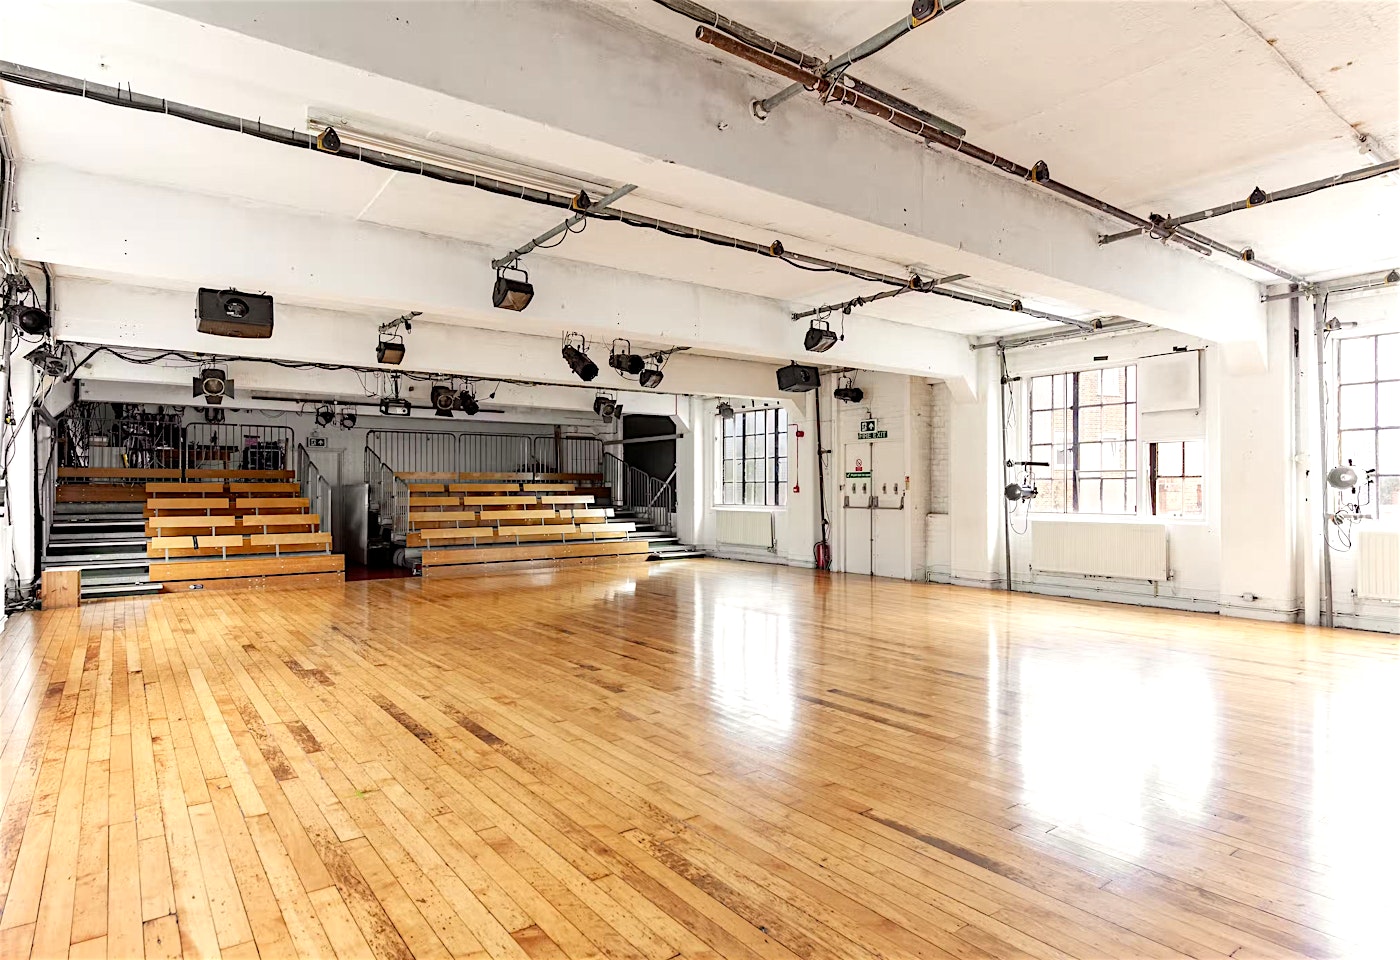 This rehearsal room is near Victoria Park, east London